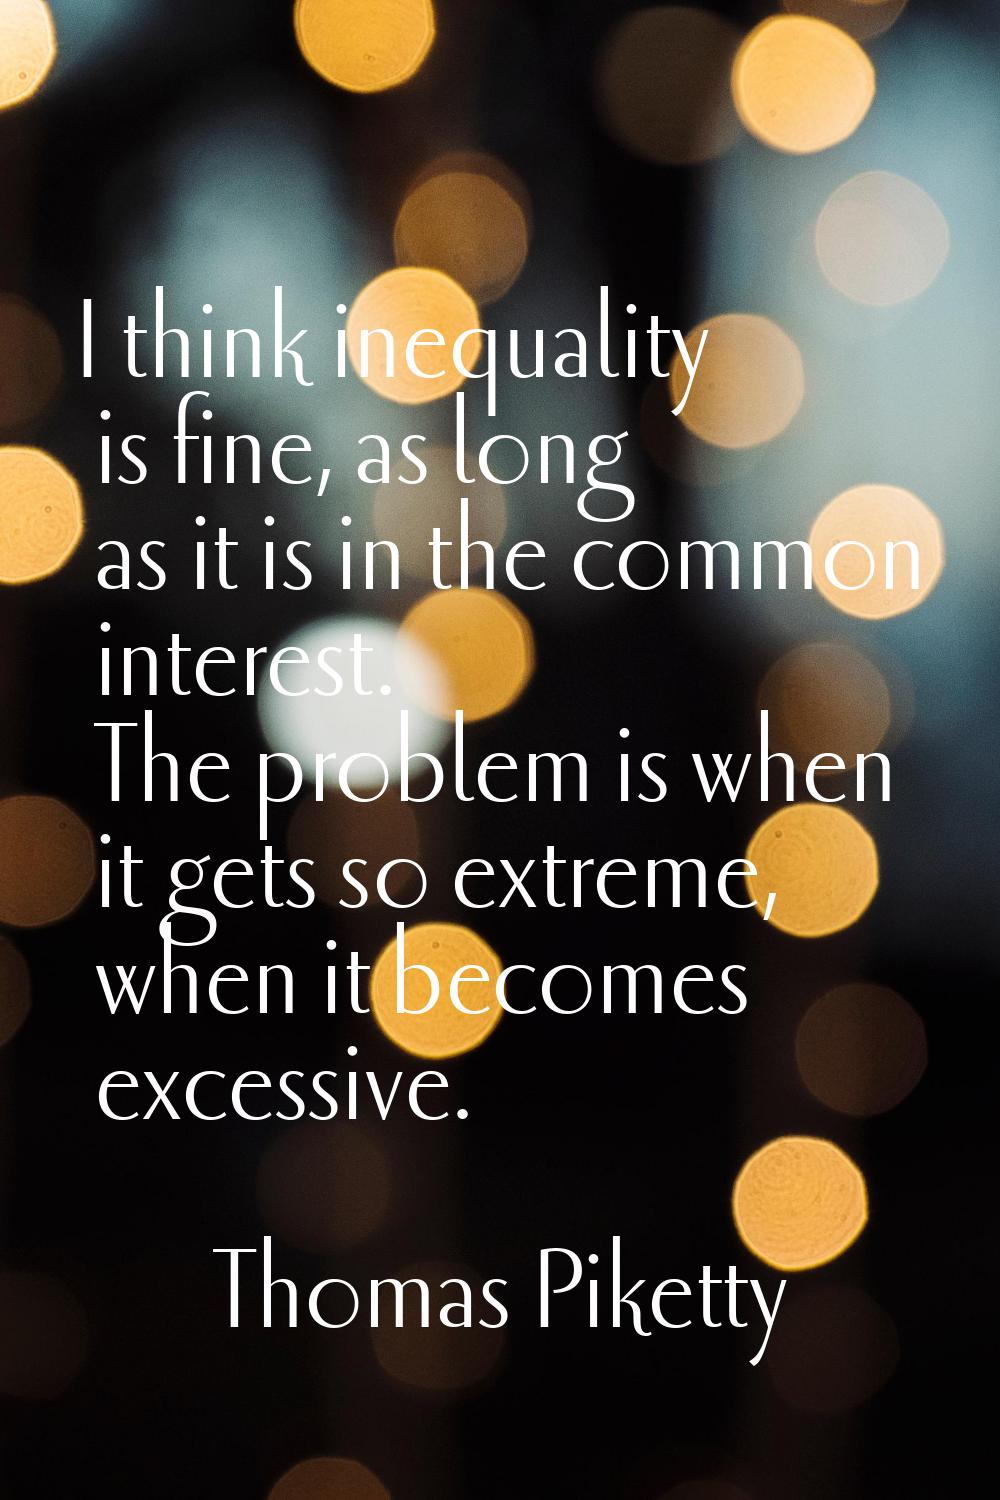 I think inequality is fine, as long as it is in the common interest. The problem is when it gets so